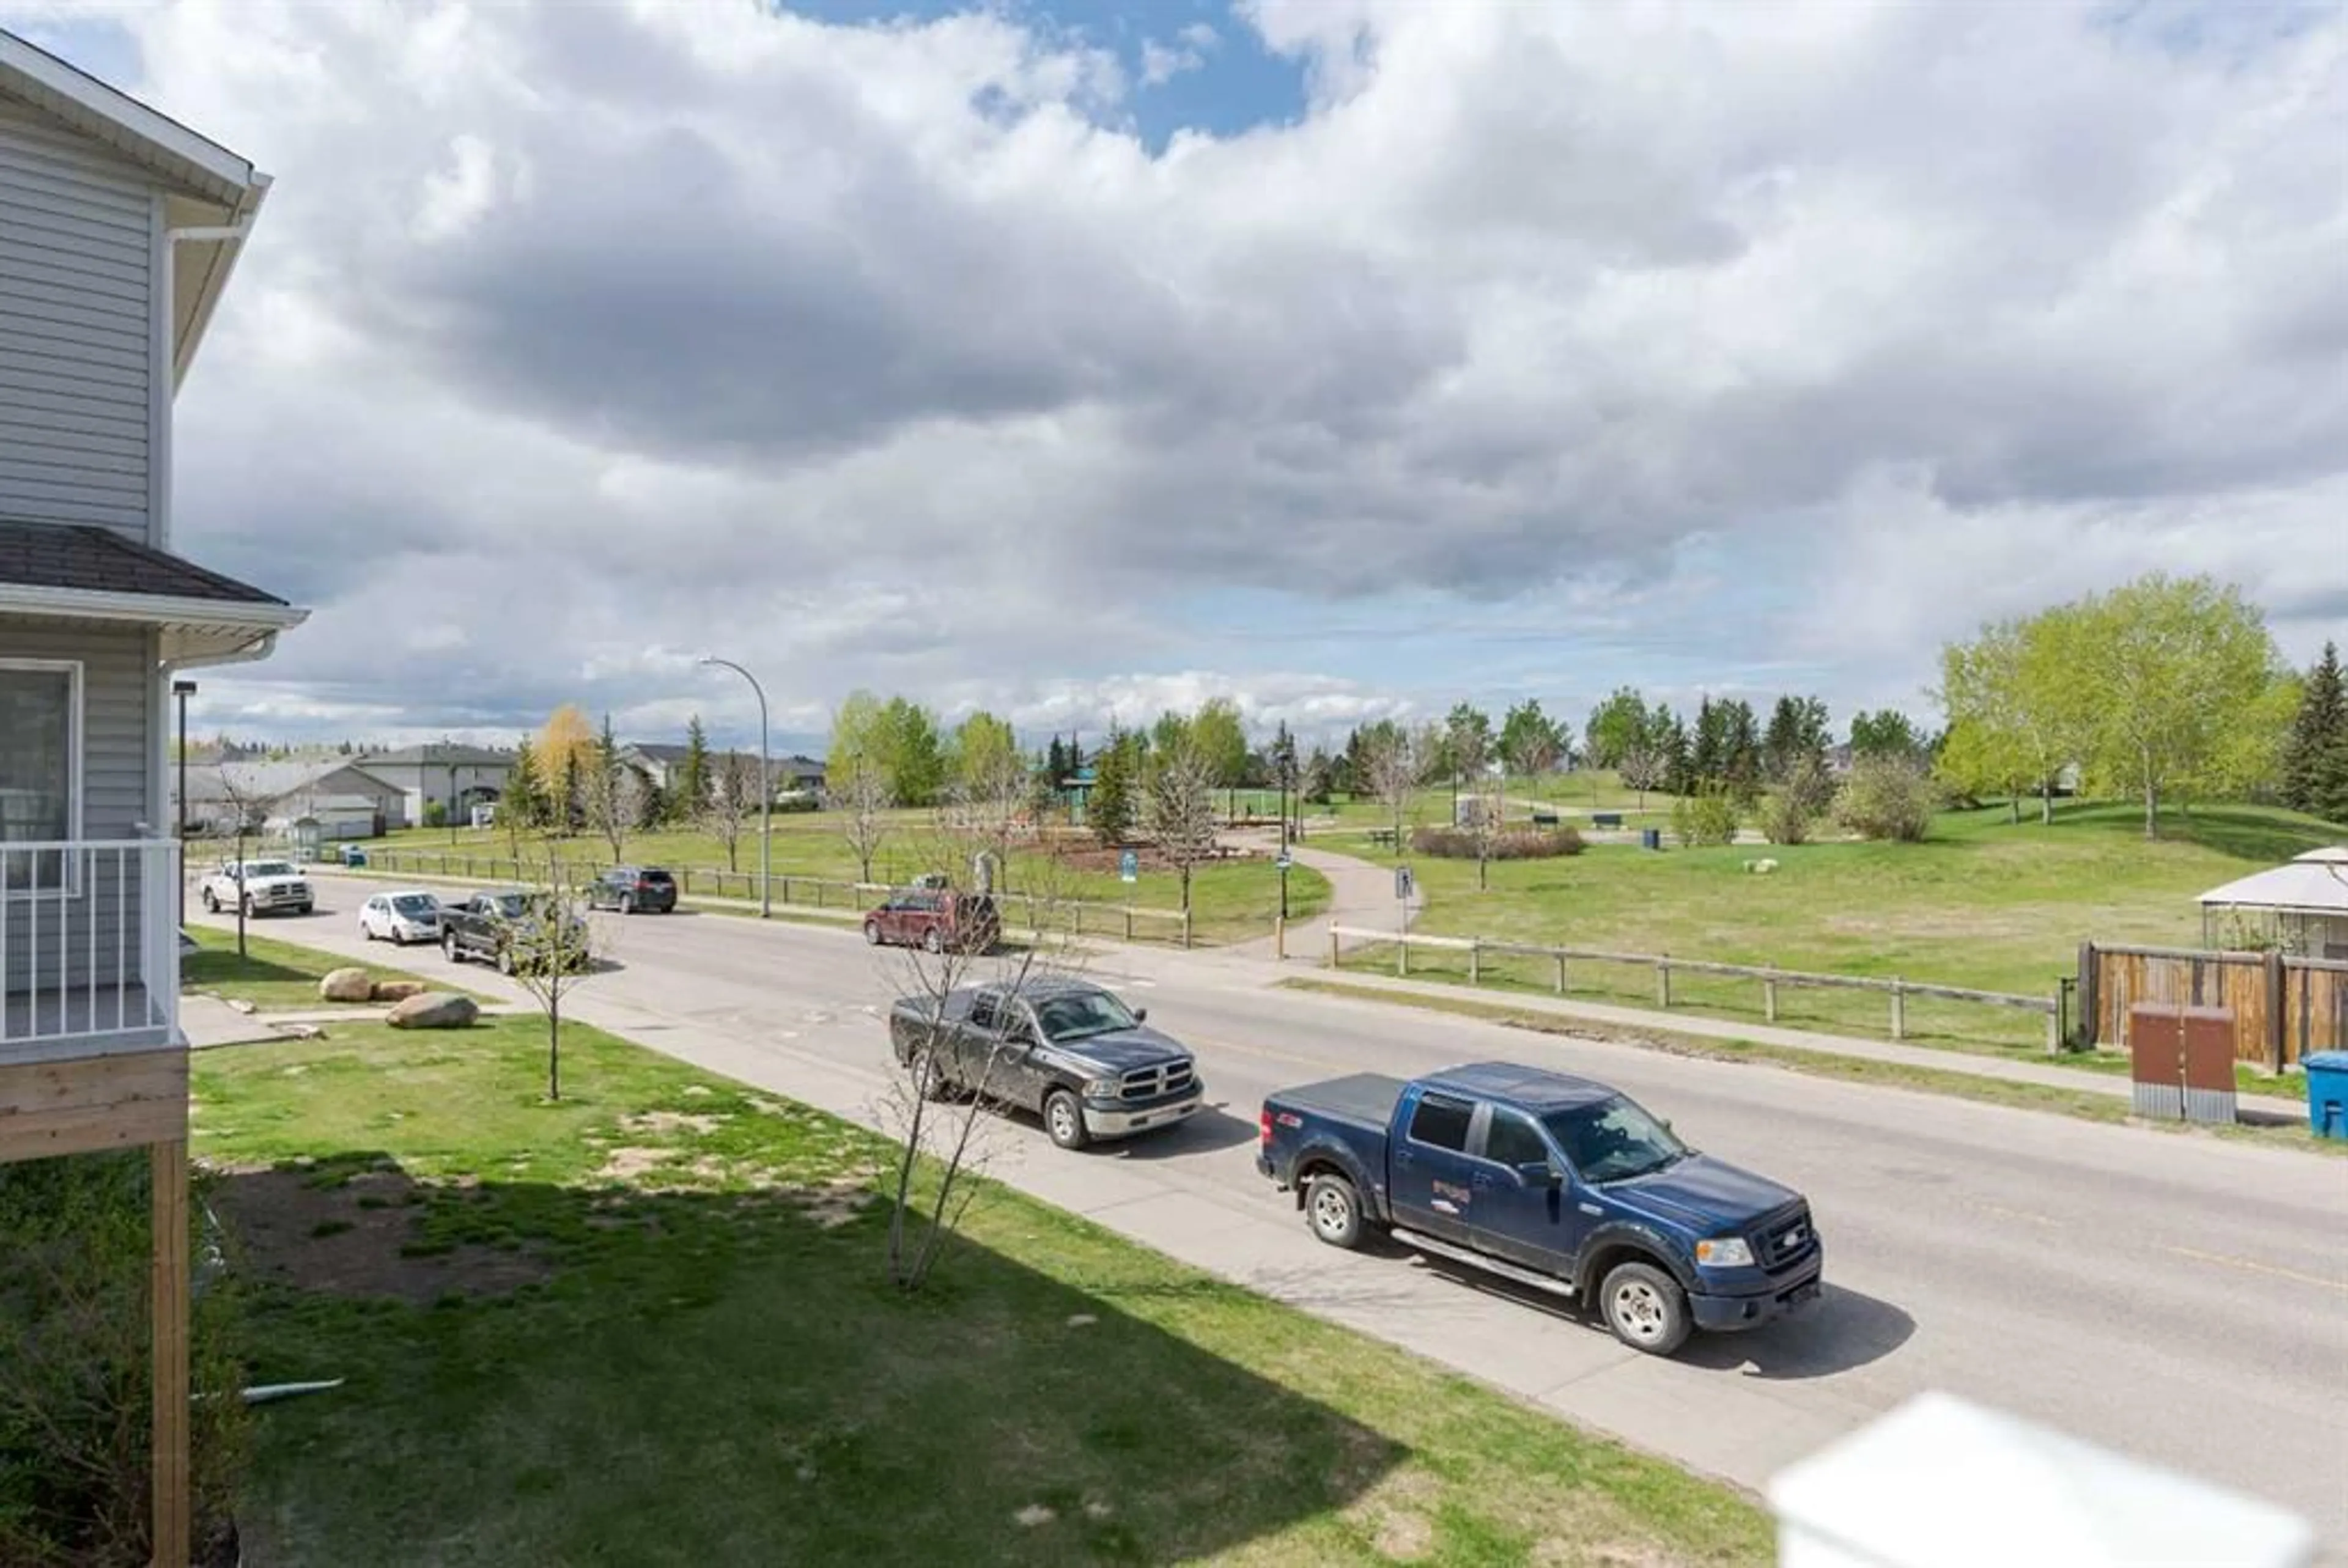 Street view for 104 Loutit Rd #307, Fort McMurray Alberta T9K 0A2